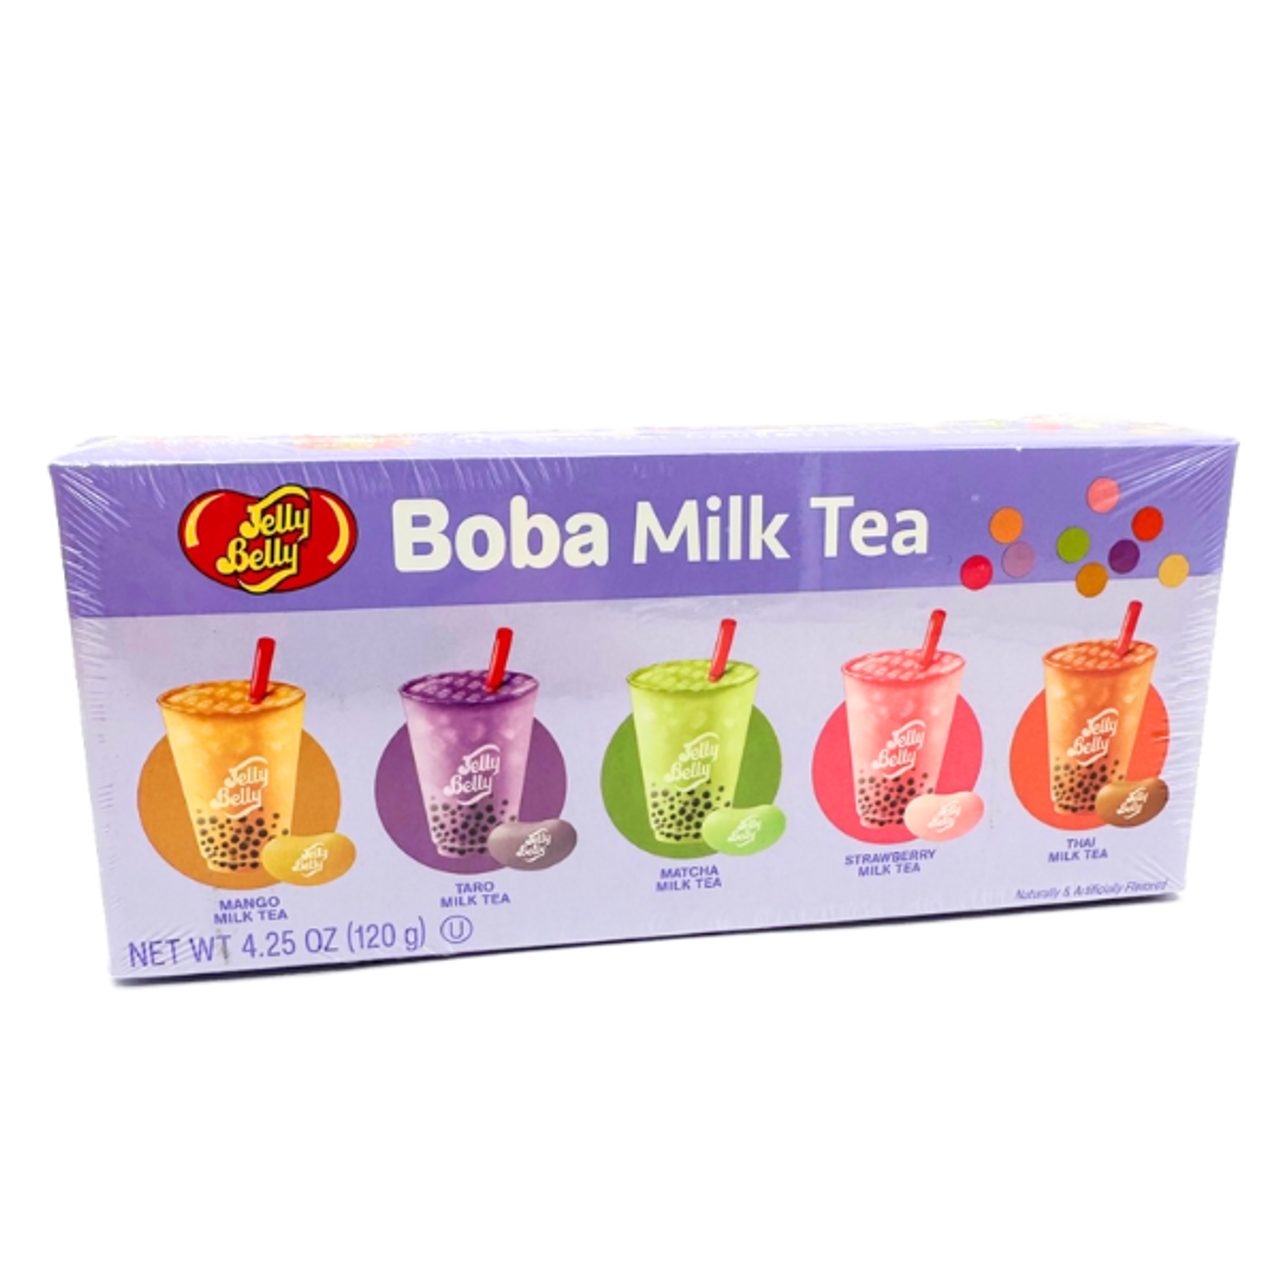 https://cdn11.bigcommerce.com/s-omwfd2x16c/images/stencil/1280x1280/products/10147/13129/jelly-belly-boba-milk-tea__84404.1689540260.png?c=1